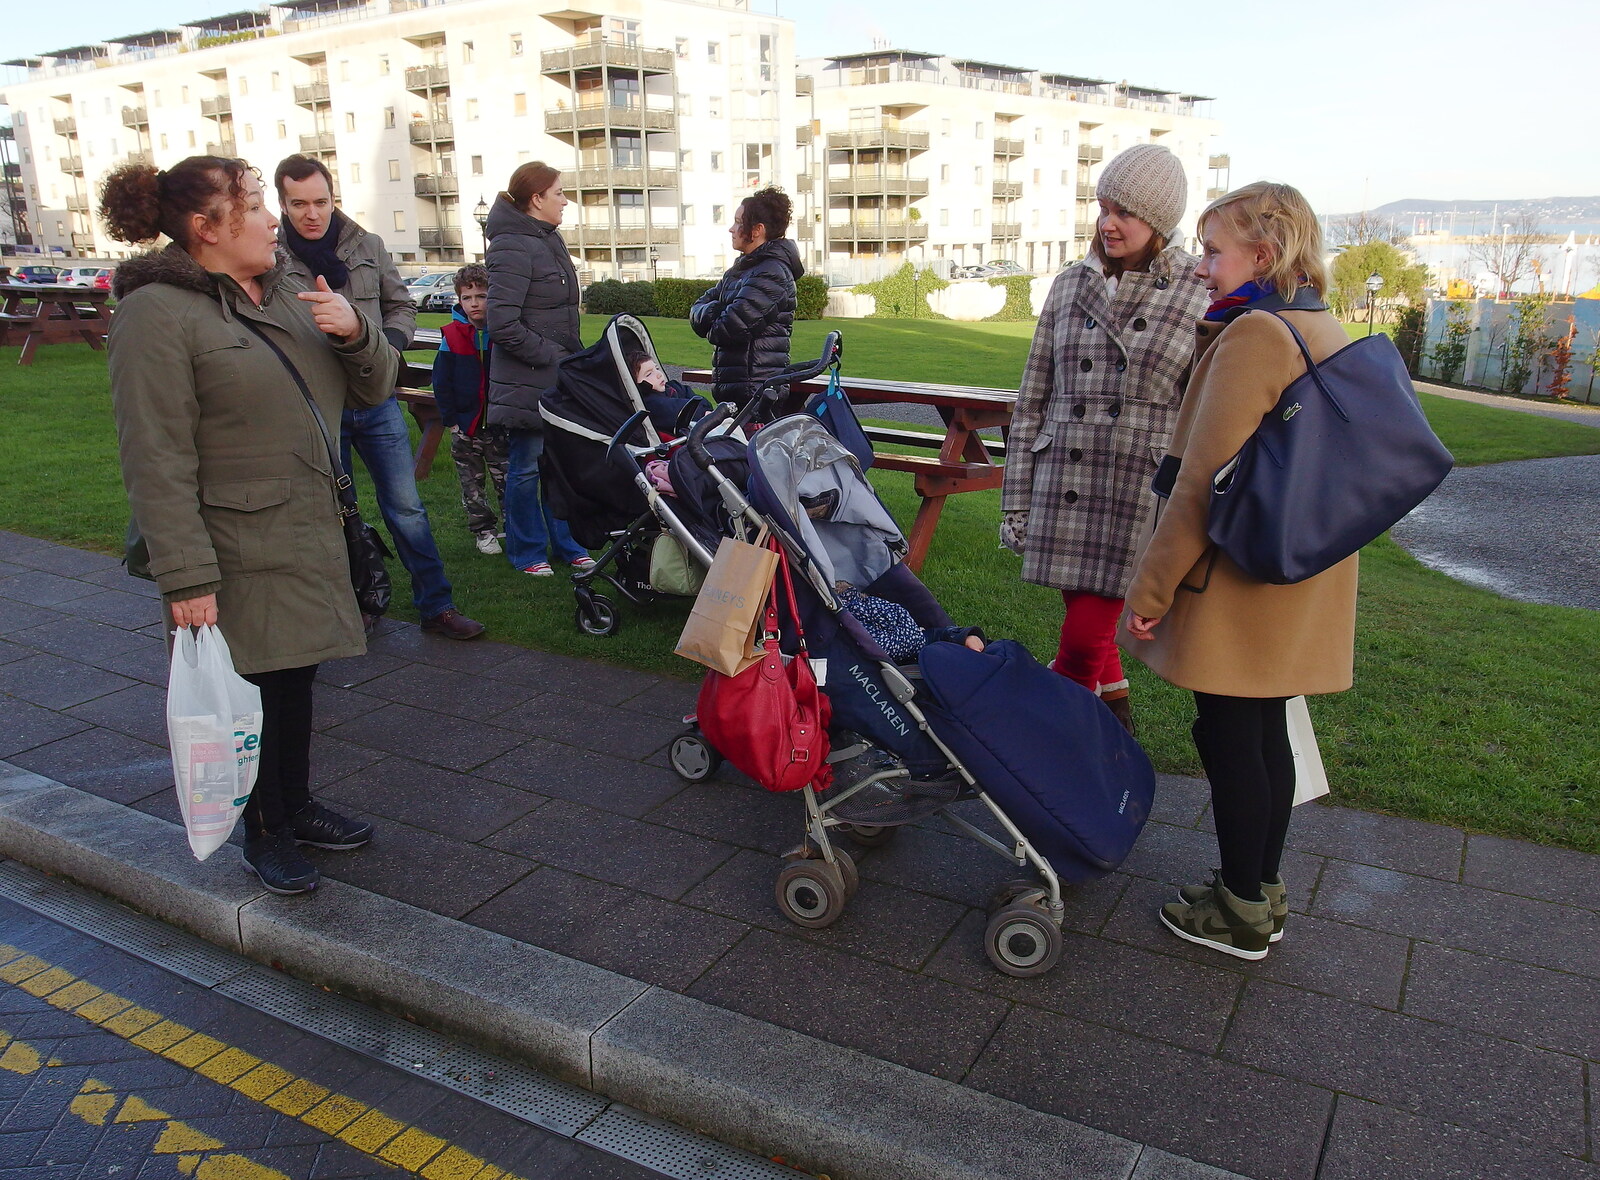 There's a meeting outside the Royal Marine Hotel from Dun Laoghaire and an Electrical Disaster, Monkstown, County Dublin, Ireland - 4th January 2014